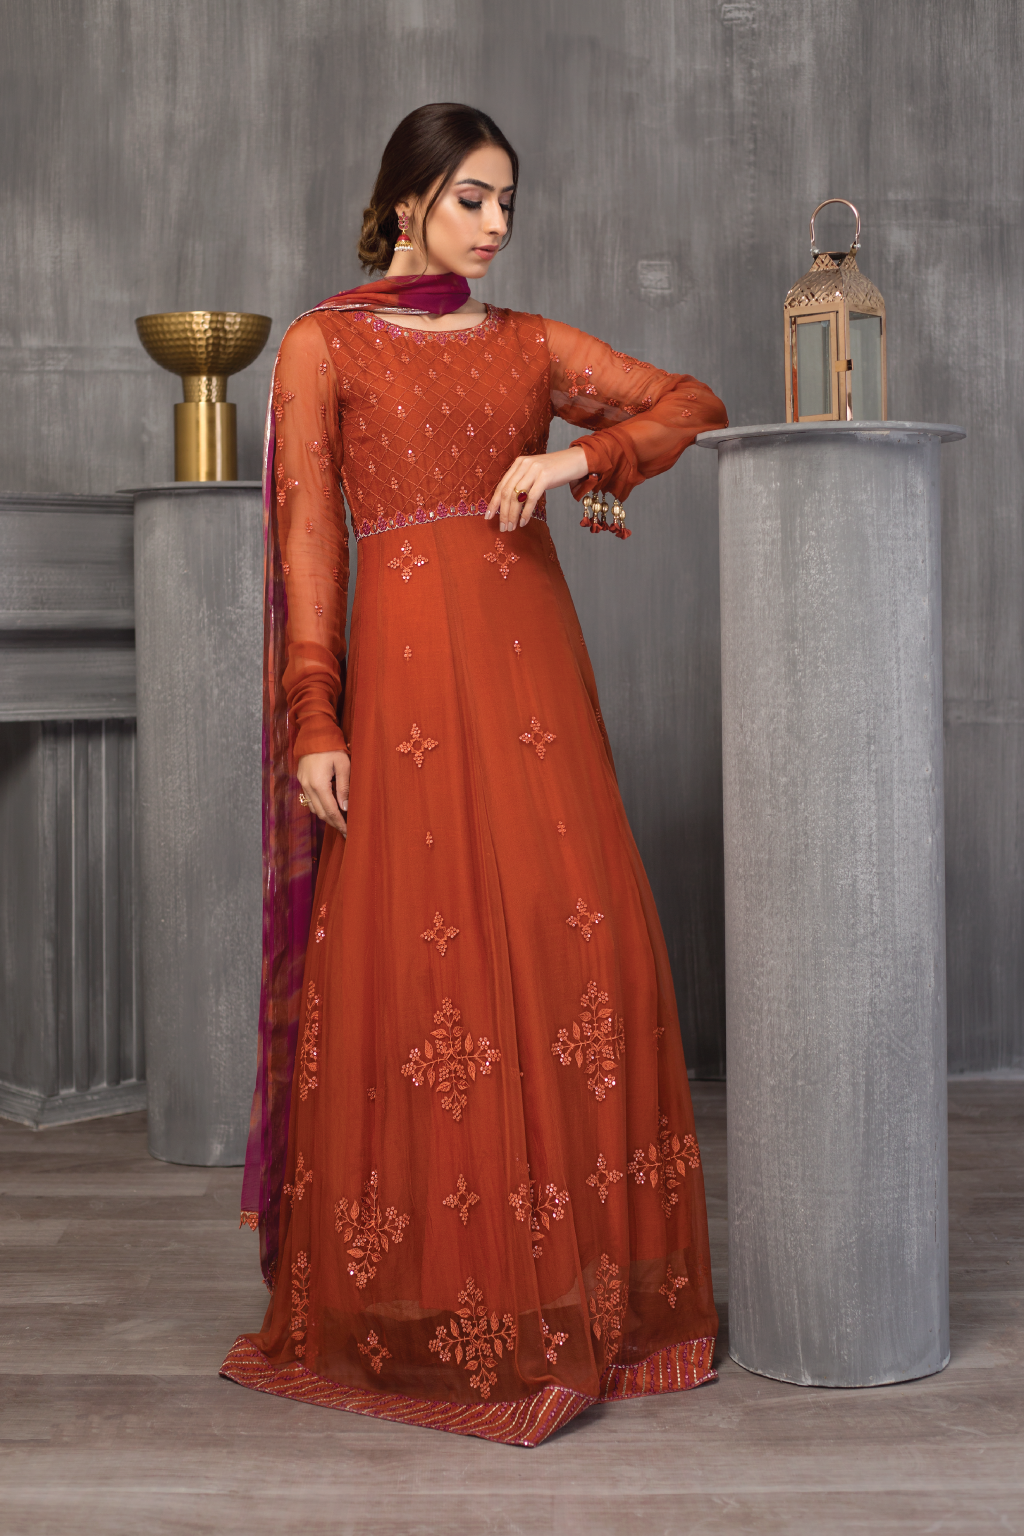 Iznik Pret Wear 2021 | EMPIRE Rust 2 piece lawn dress is most popular for Eid dress and summer outfits. We have wide range of stitched and Readymade dresses of Iznik lawn 2021, Iznik pret '21. This Eid get yourself elegant and classy outfit of Iznik in USA, UK, France, Spain from Lebaasonline at SALE price!